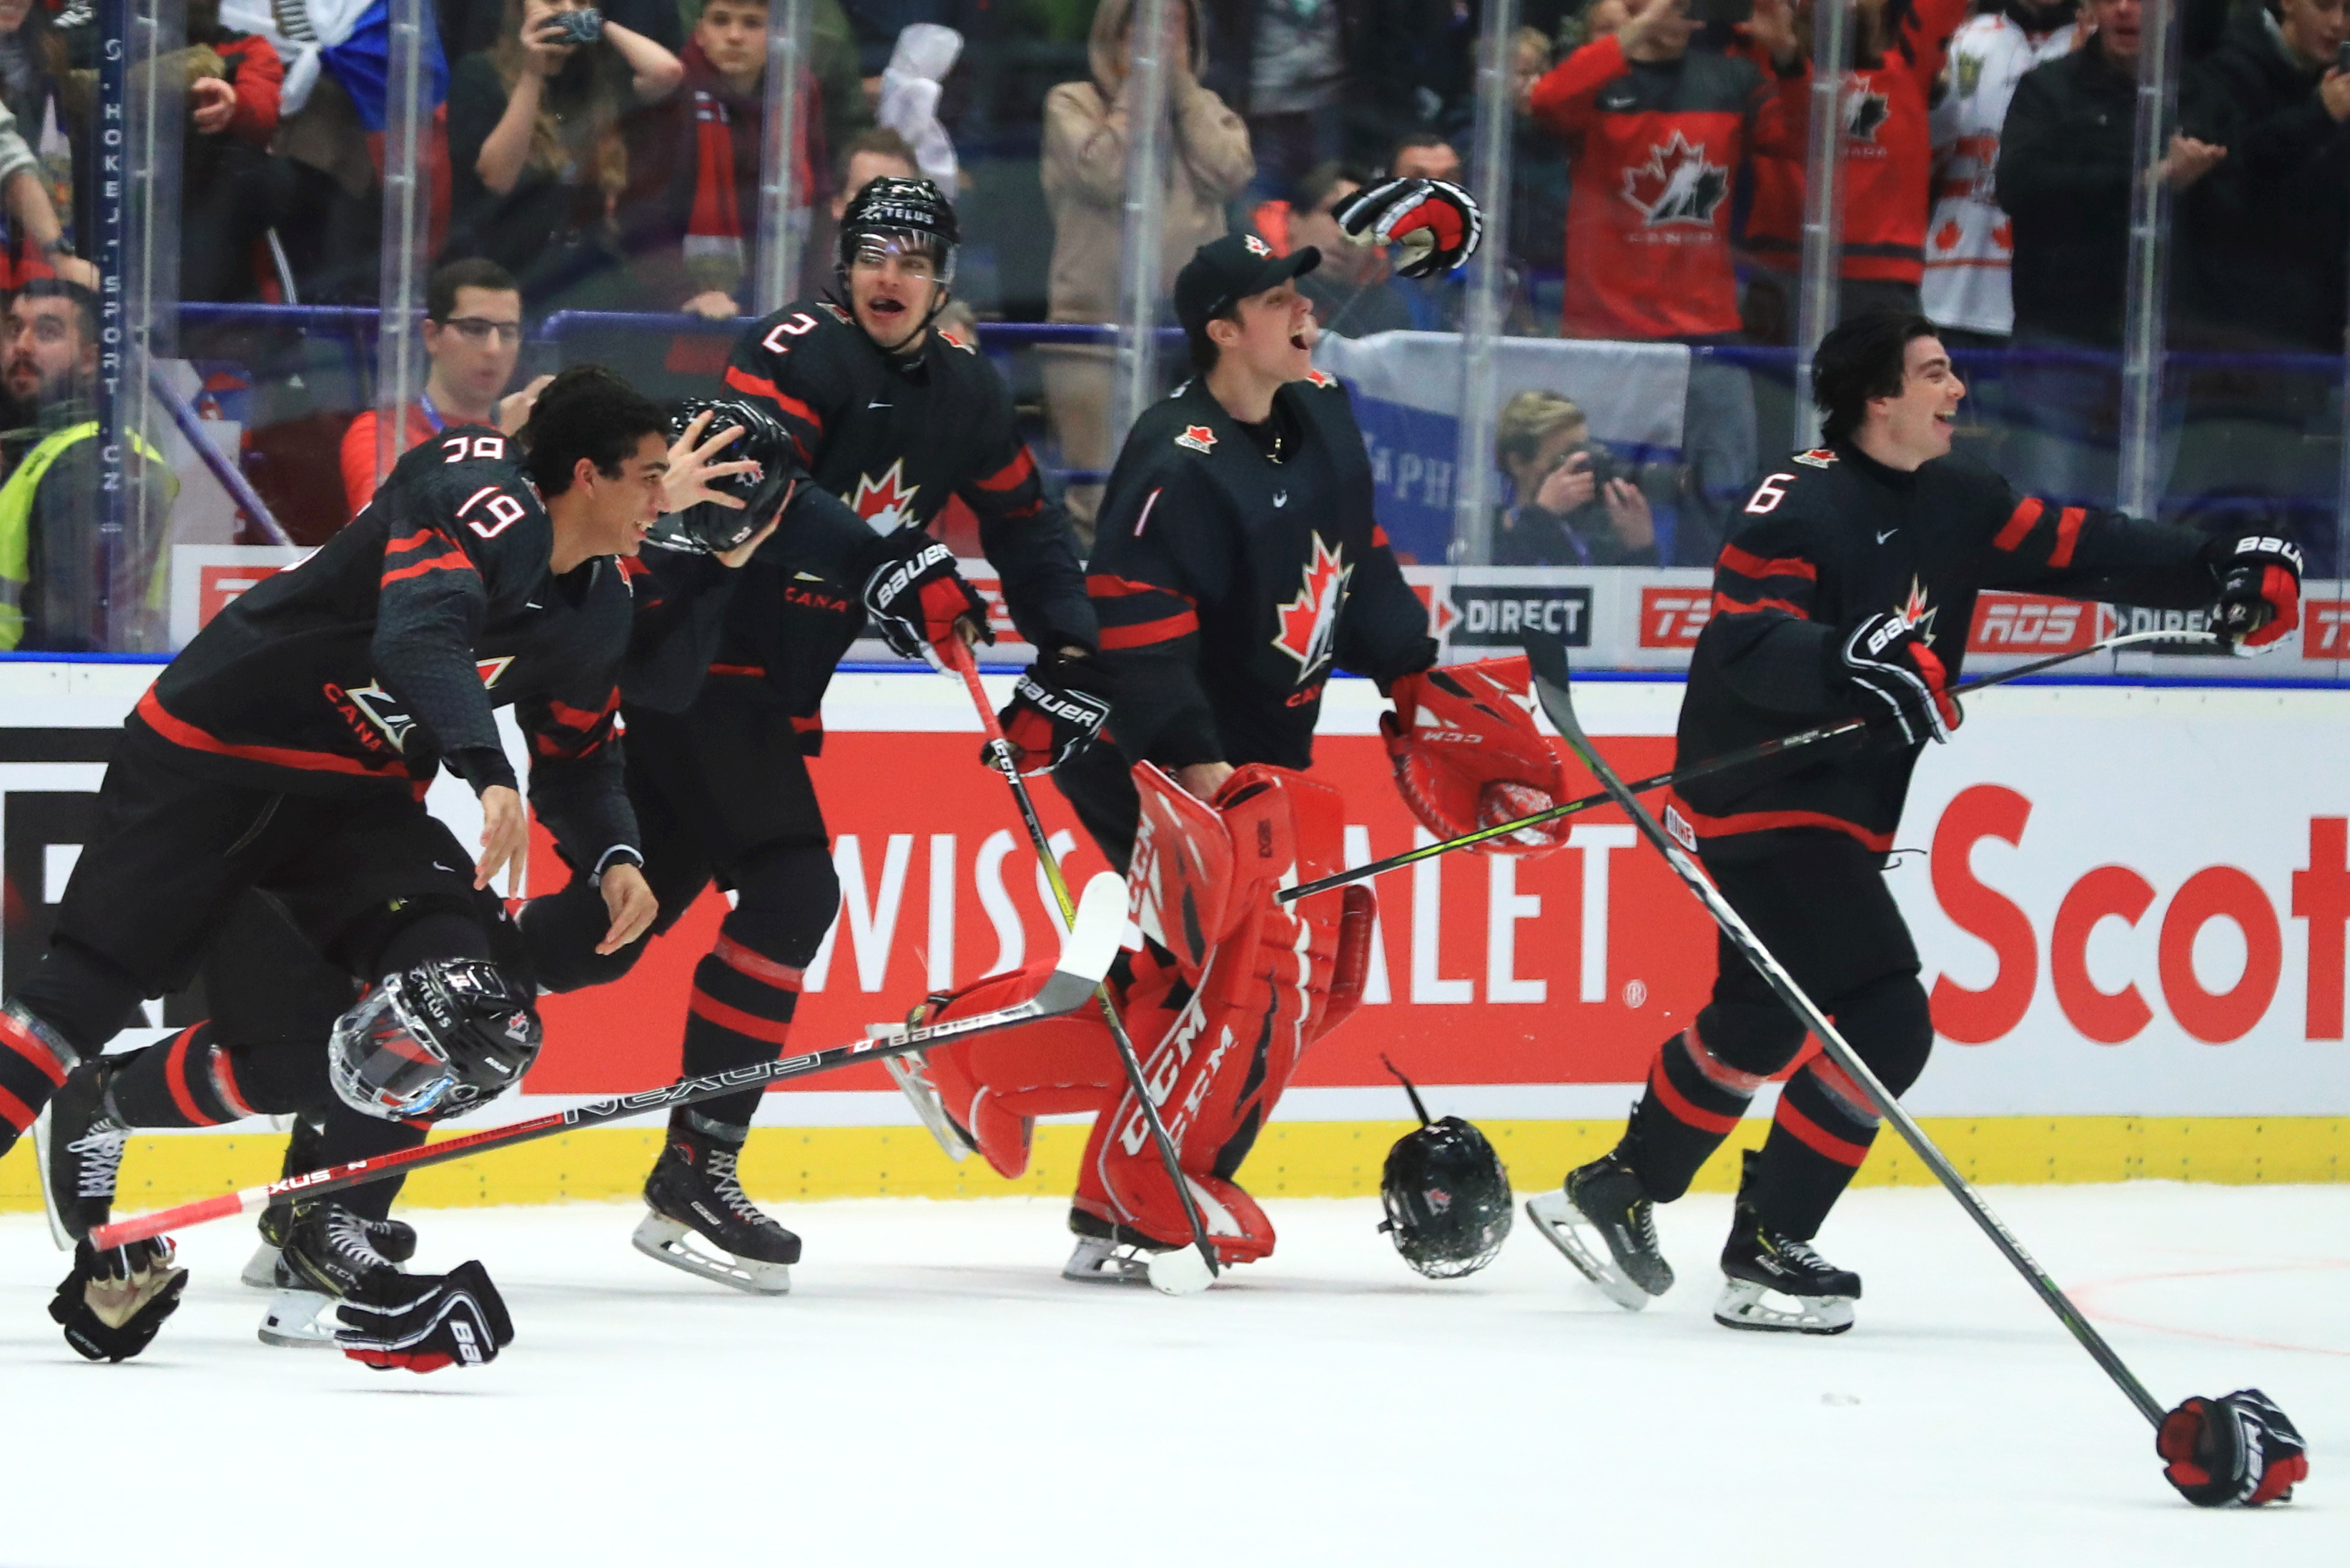 Canada’s Quinton Byfield, Kevin Bahl, Nicolas Daws, and Jamie Drysdale (L-R) celebrate victory in the 2020 World Junior Ice Hockey Championship final match between Canada and Russia at Ostravar Arena; Canada won 4-3.